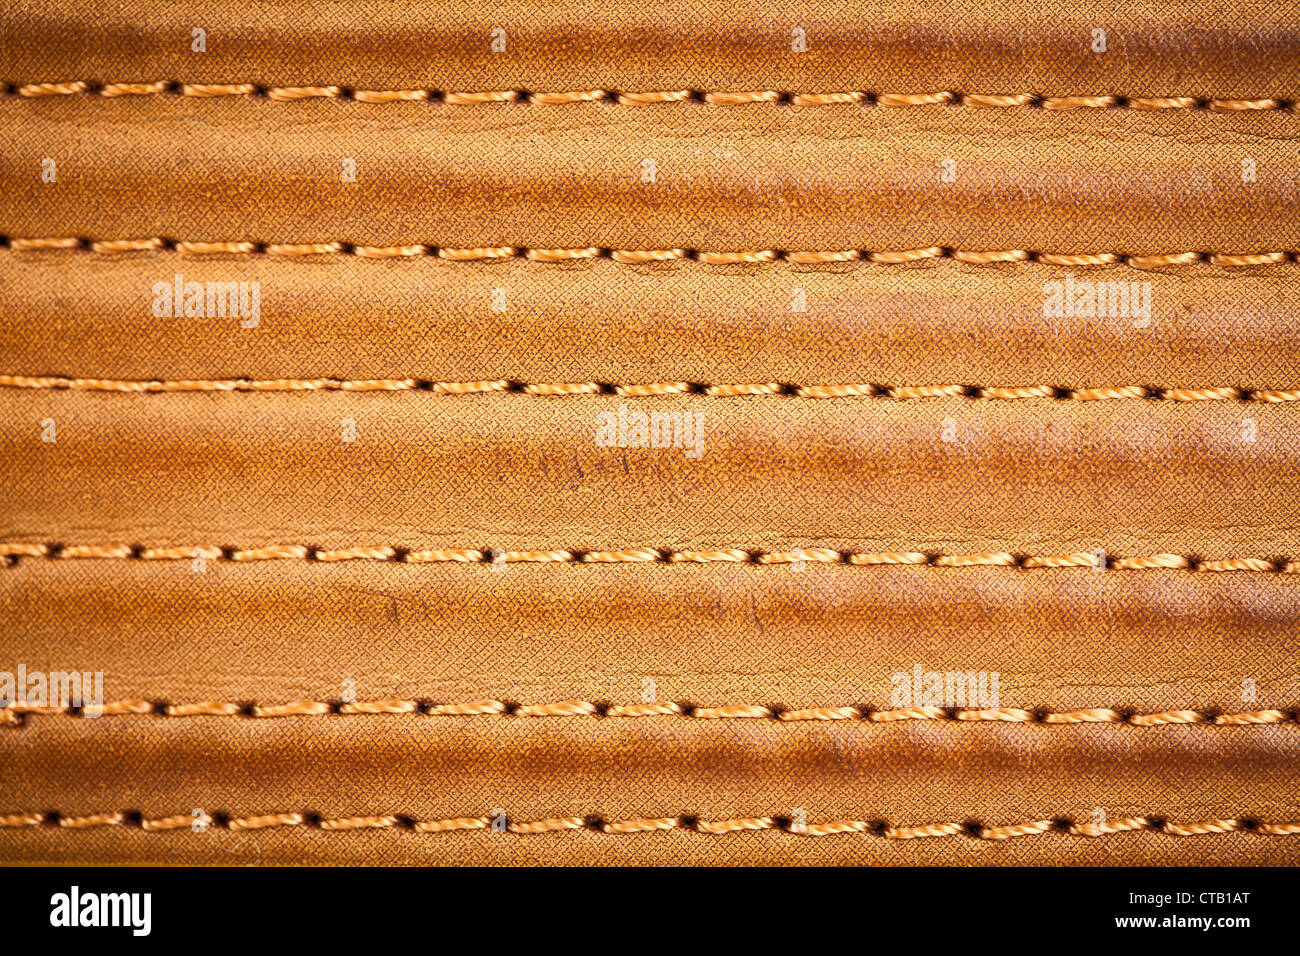 leather stitched by threads Stock Photo